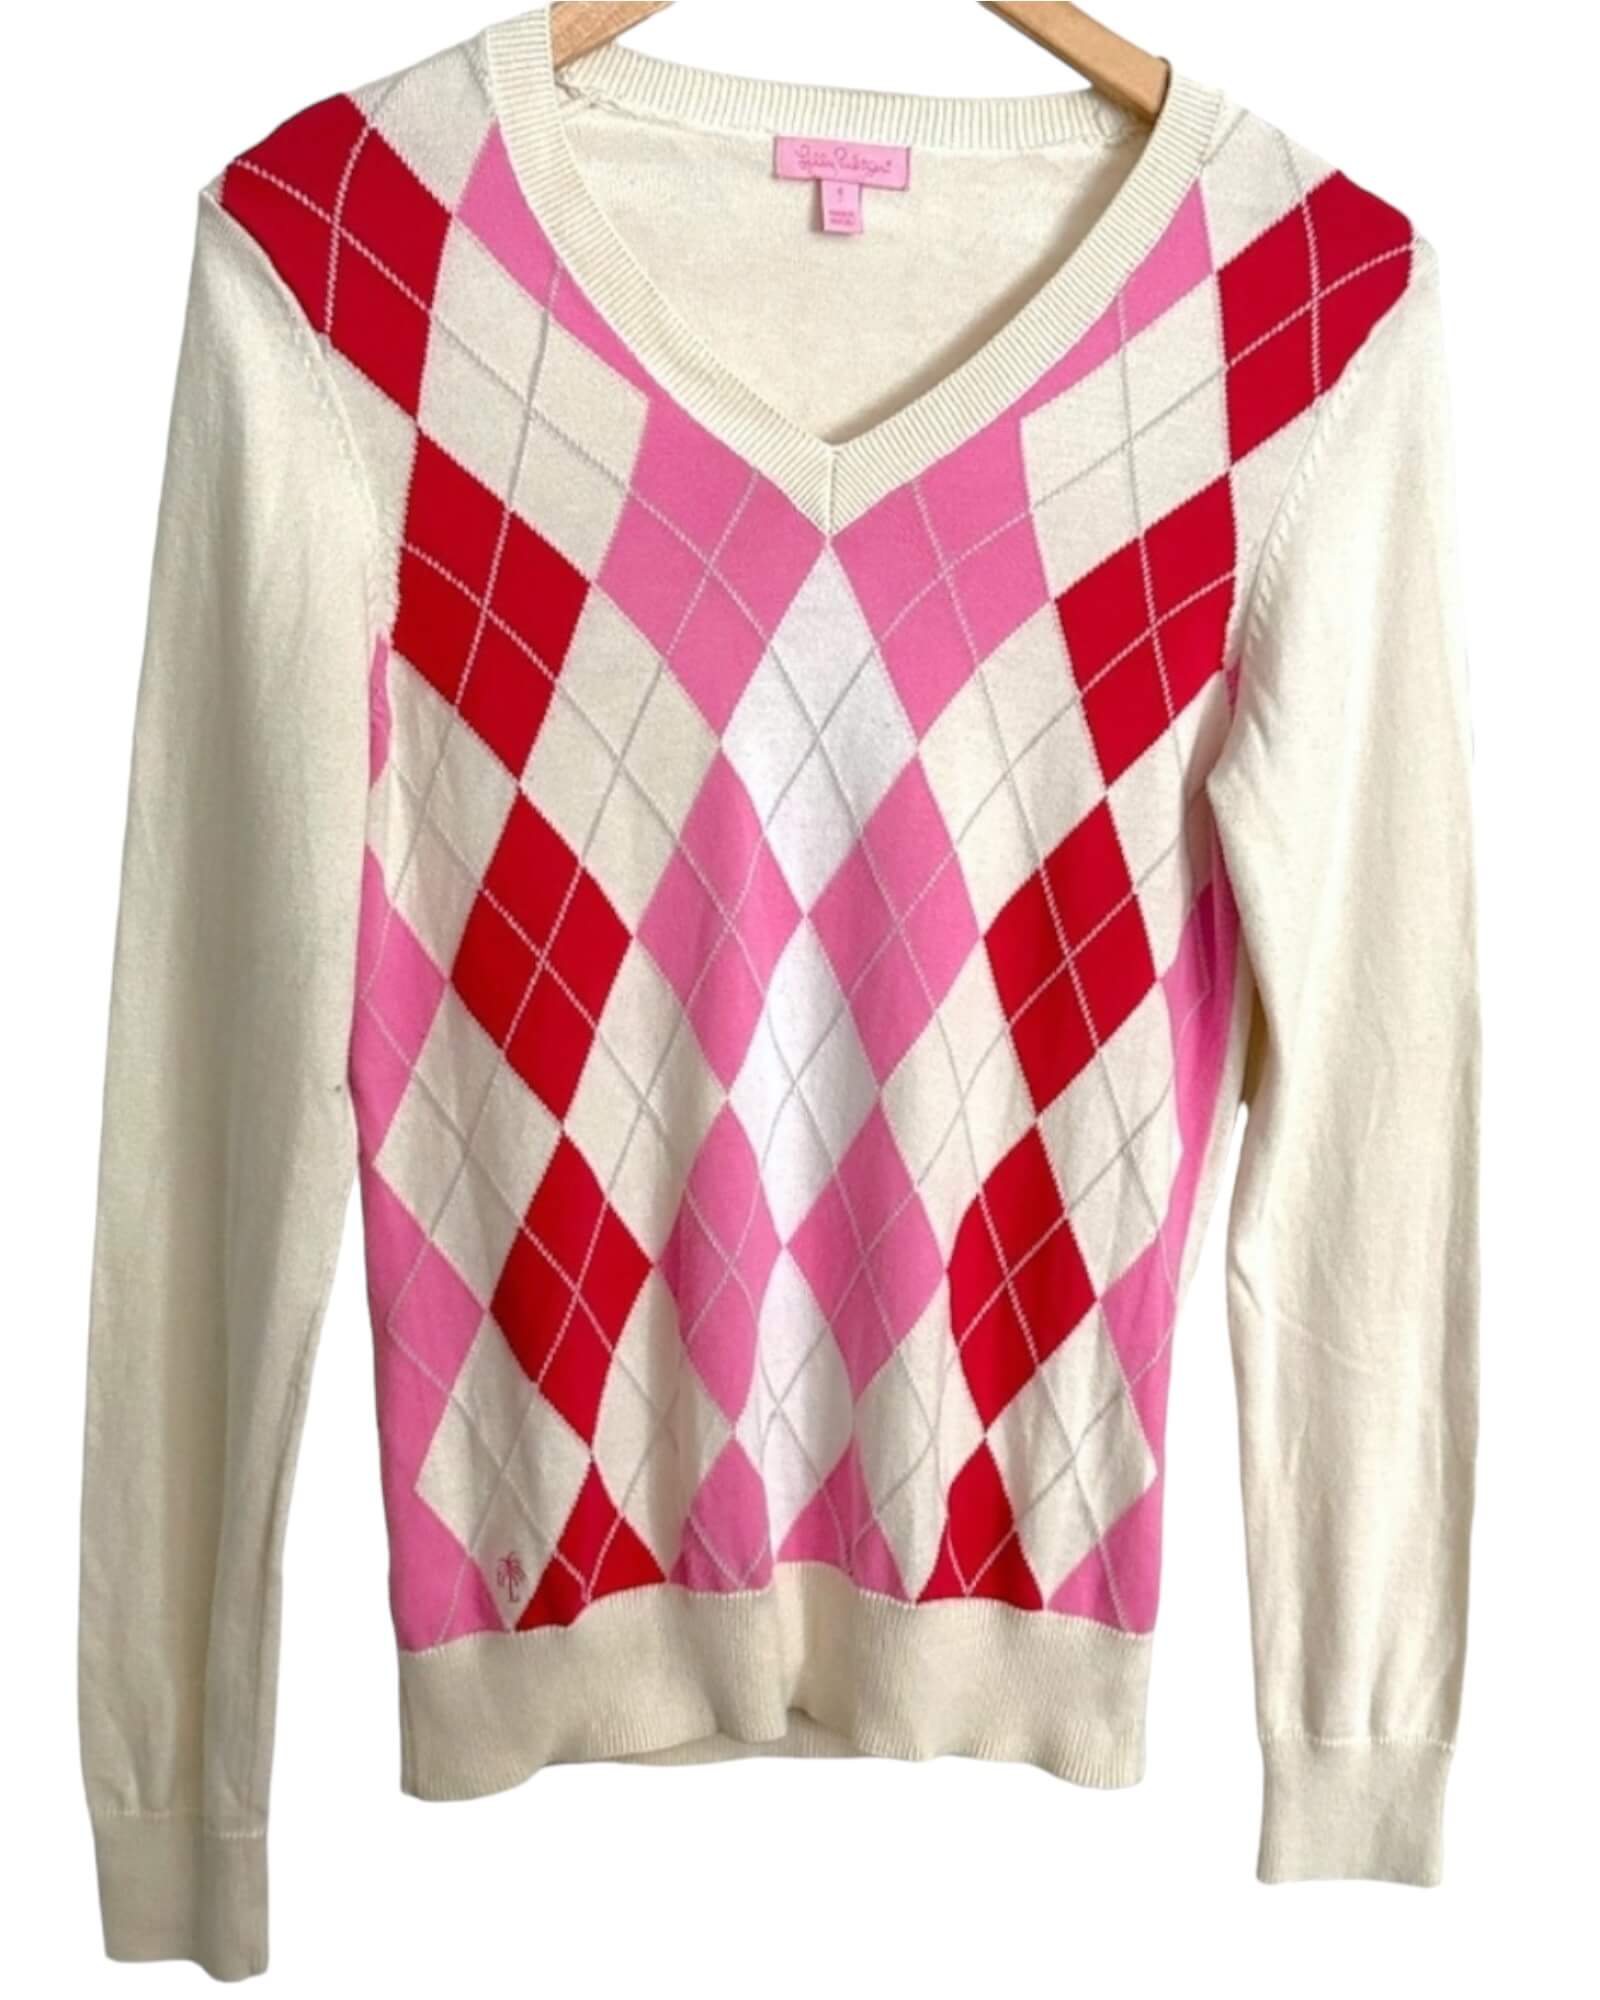 Bright Spring LILLY PULITZER v-neck pink argyle sweater 